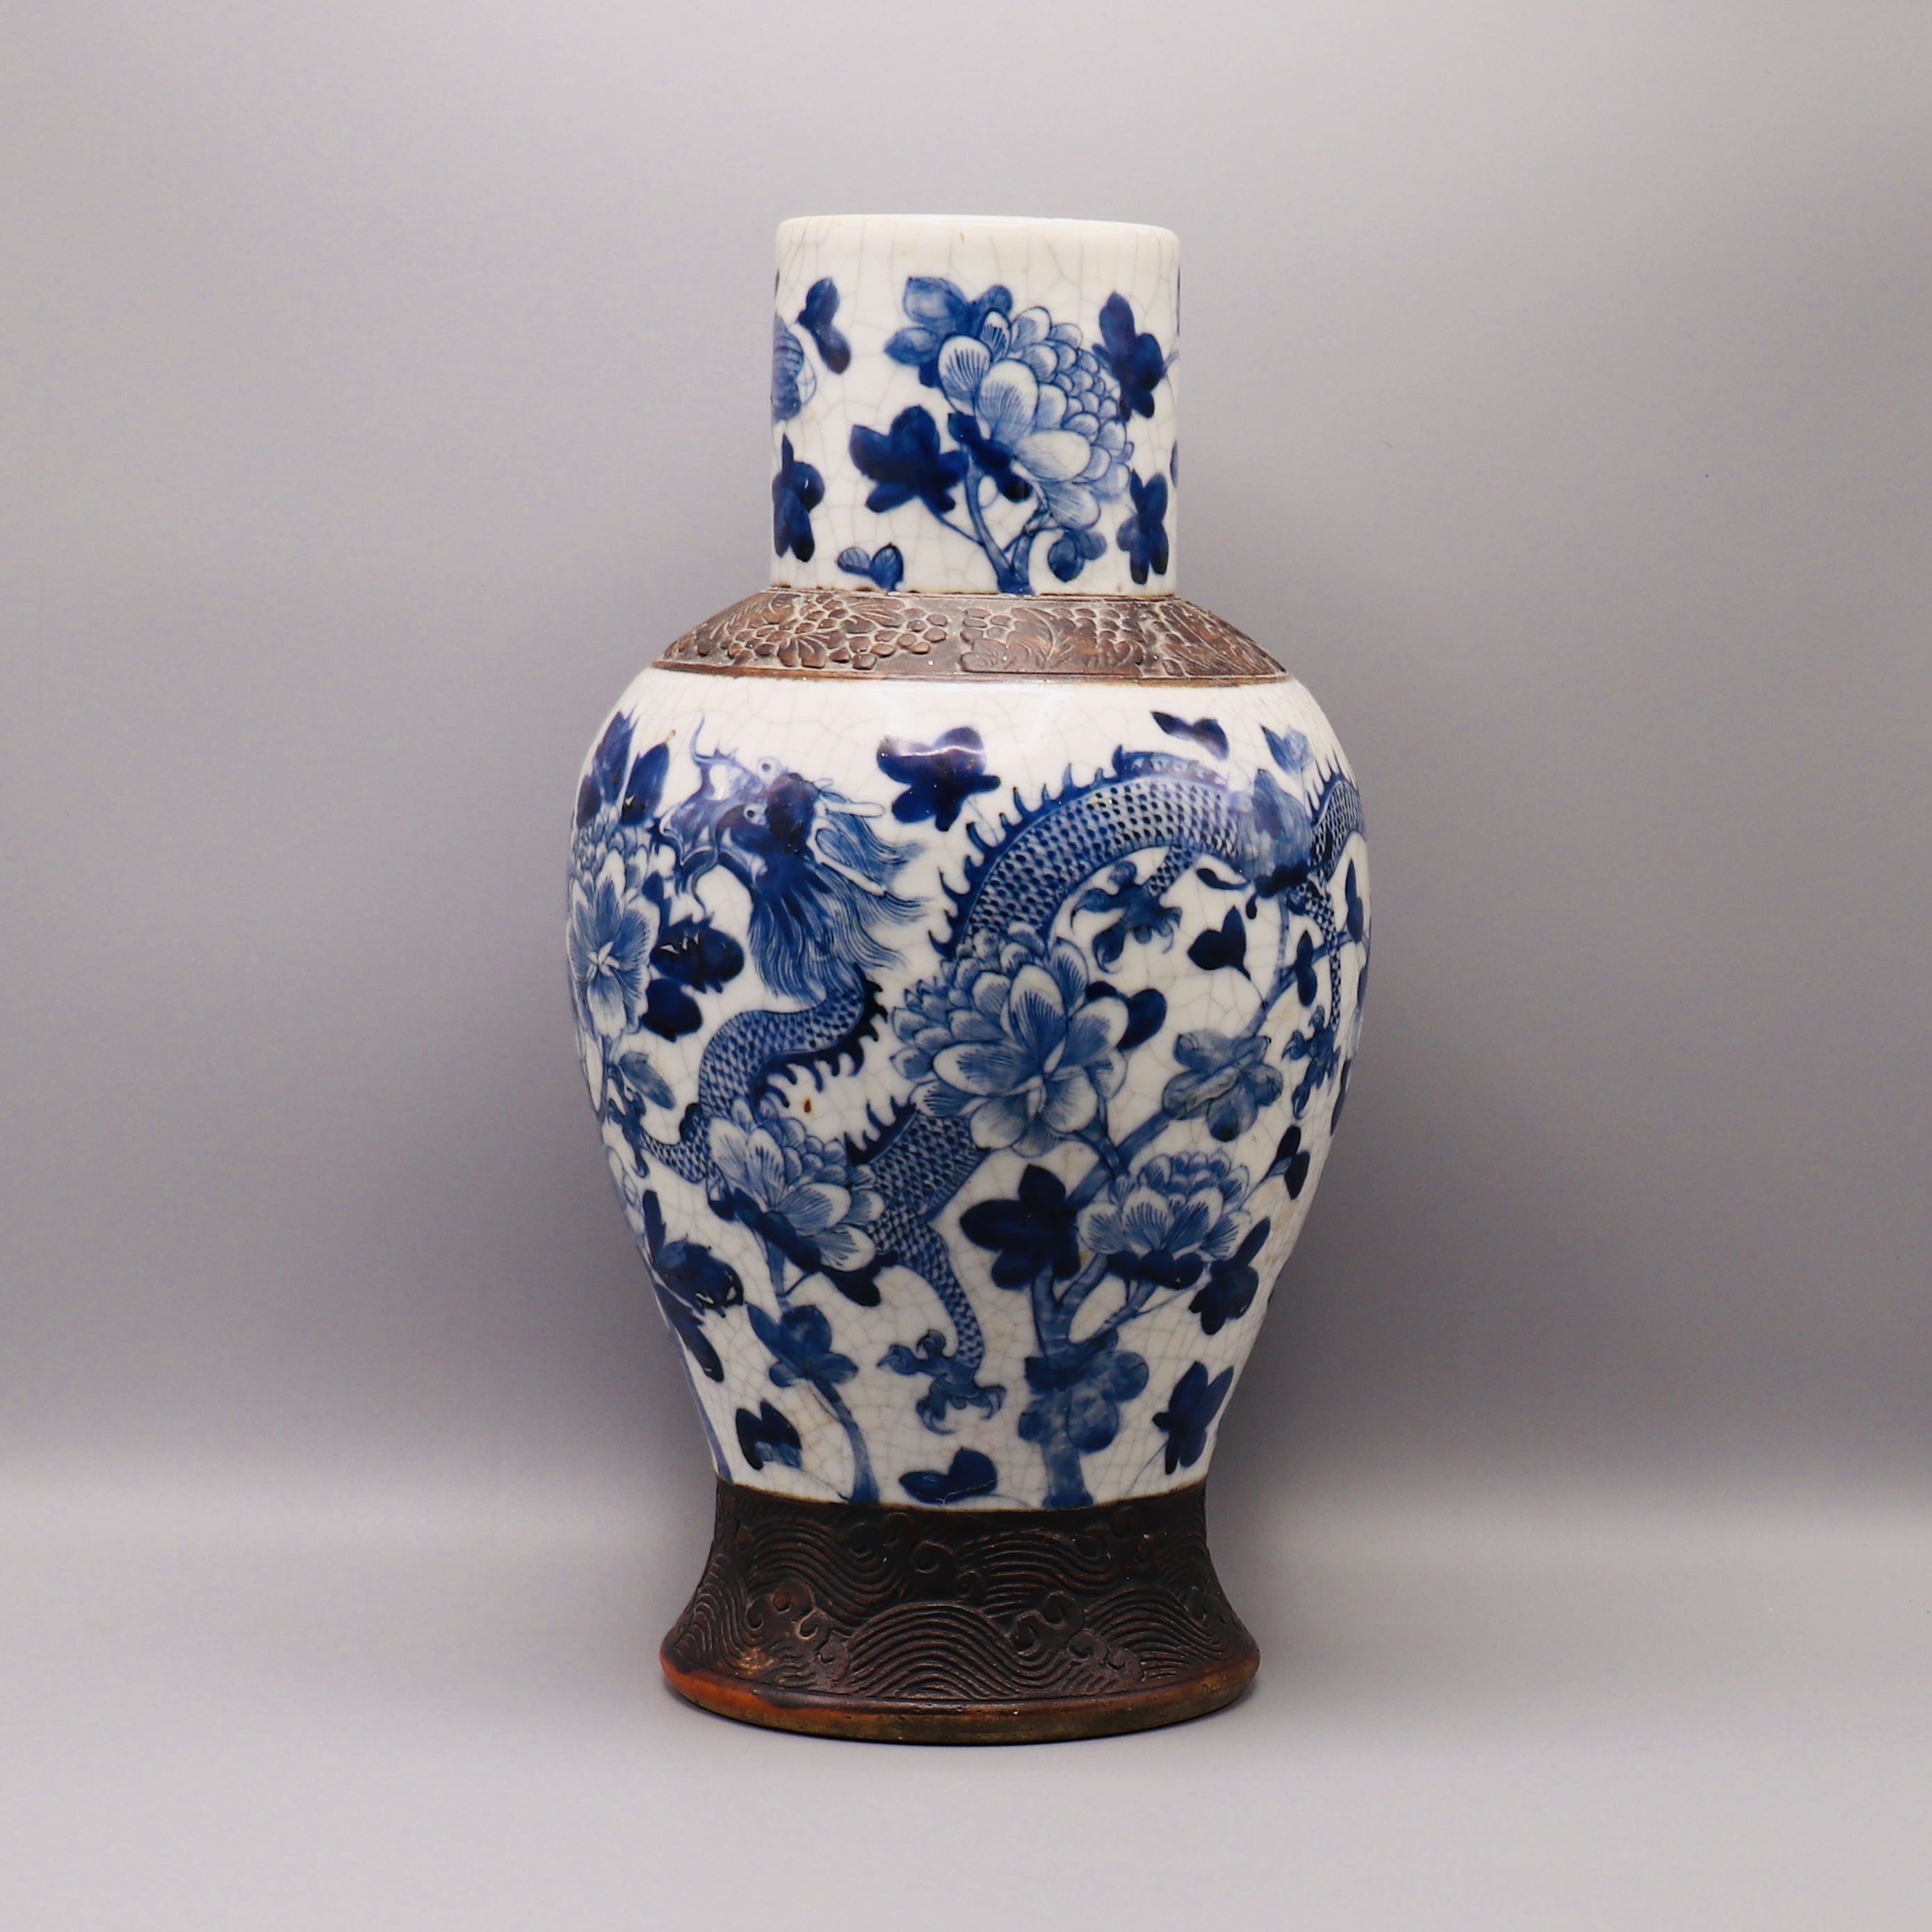 A CHINESE BLUE & WHITE CRACKLE VASE DEPICTING DRAGONS, 19TH CENTURY